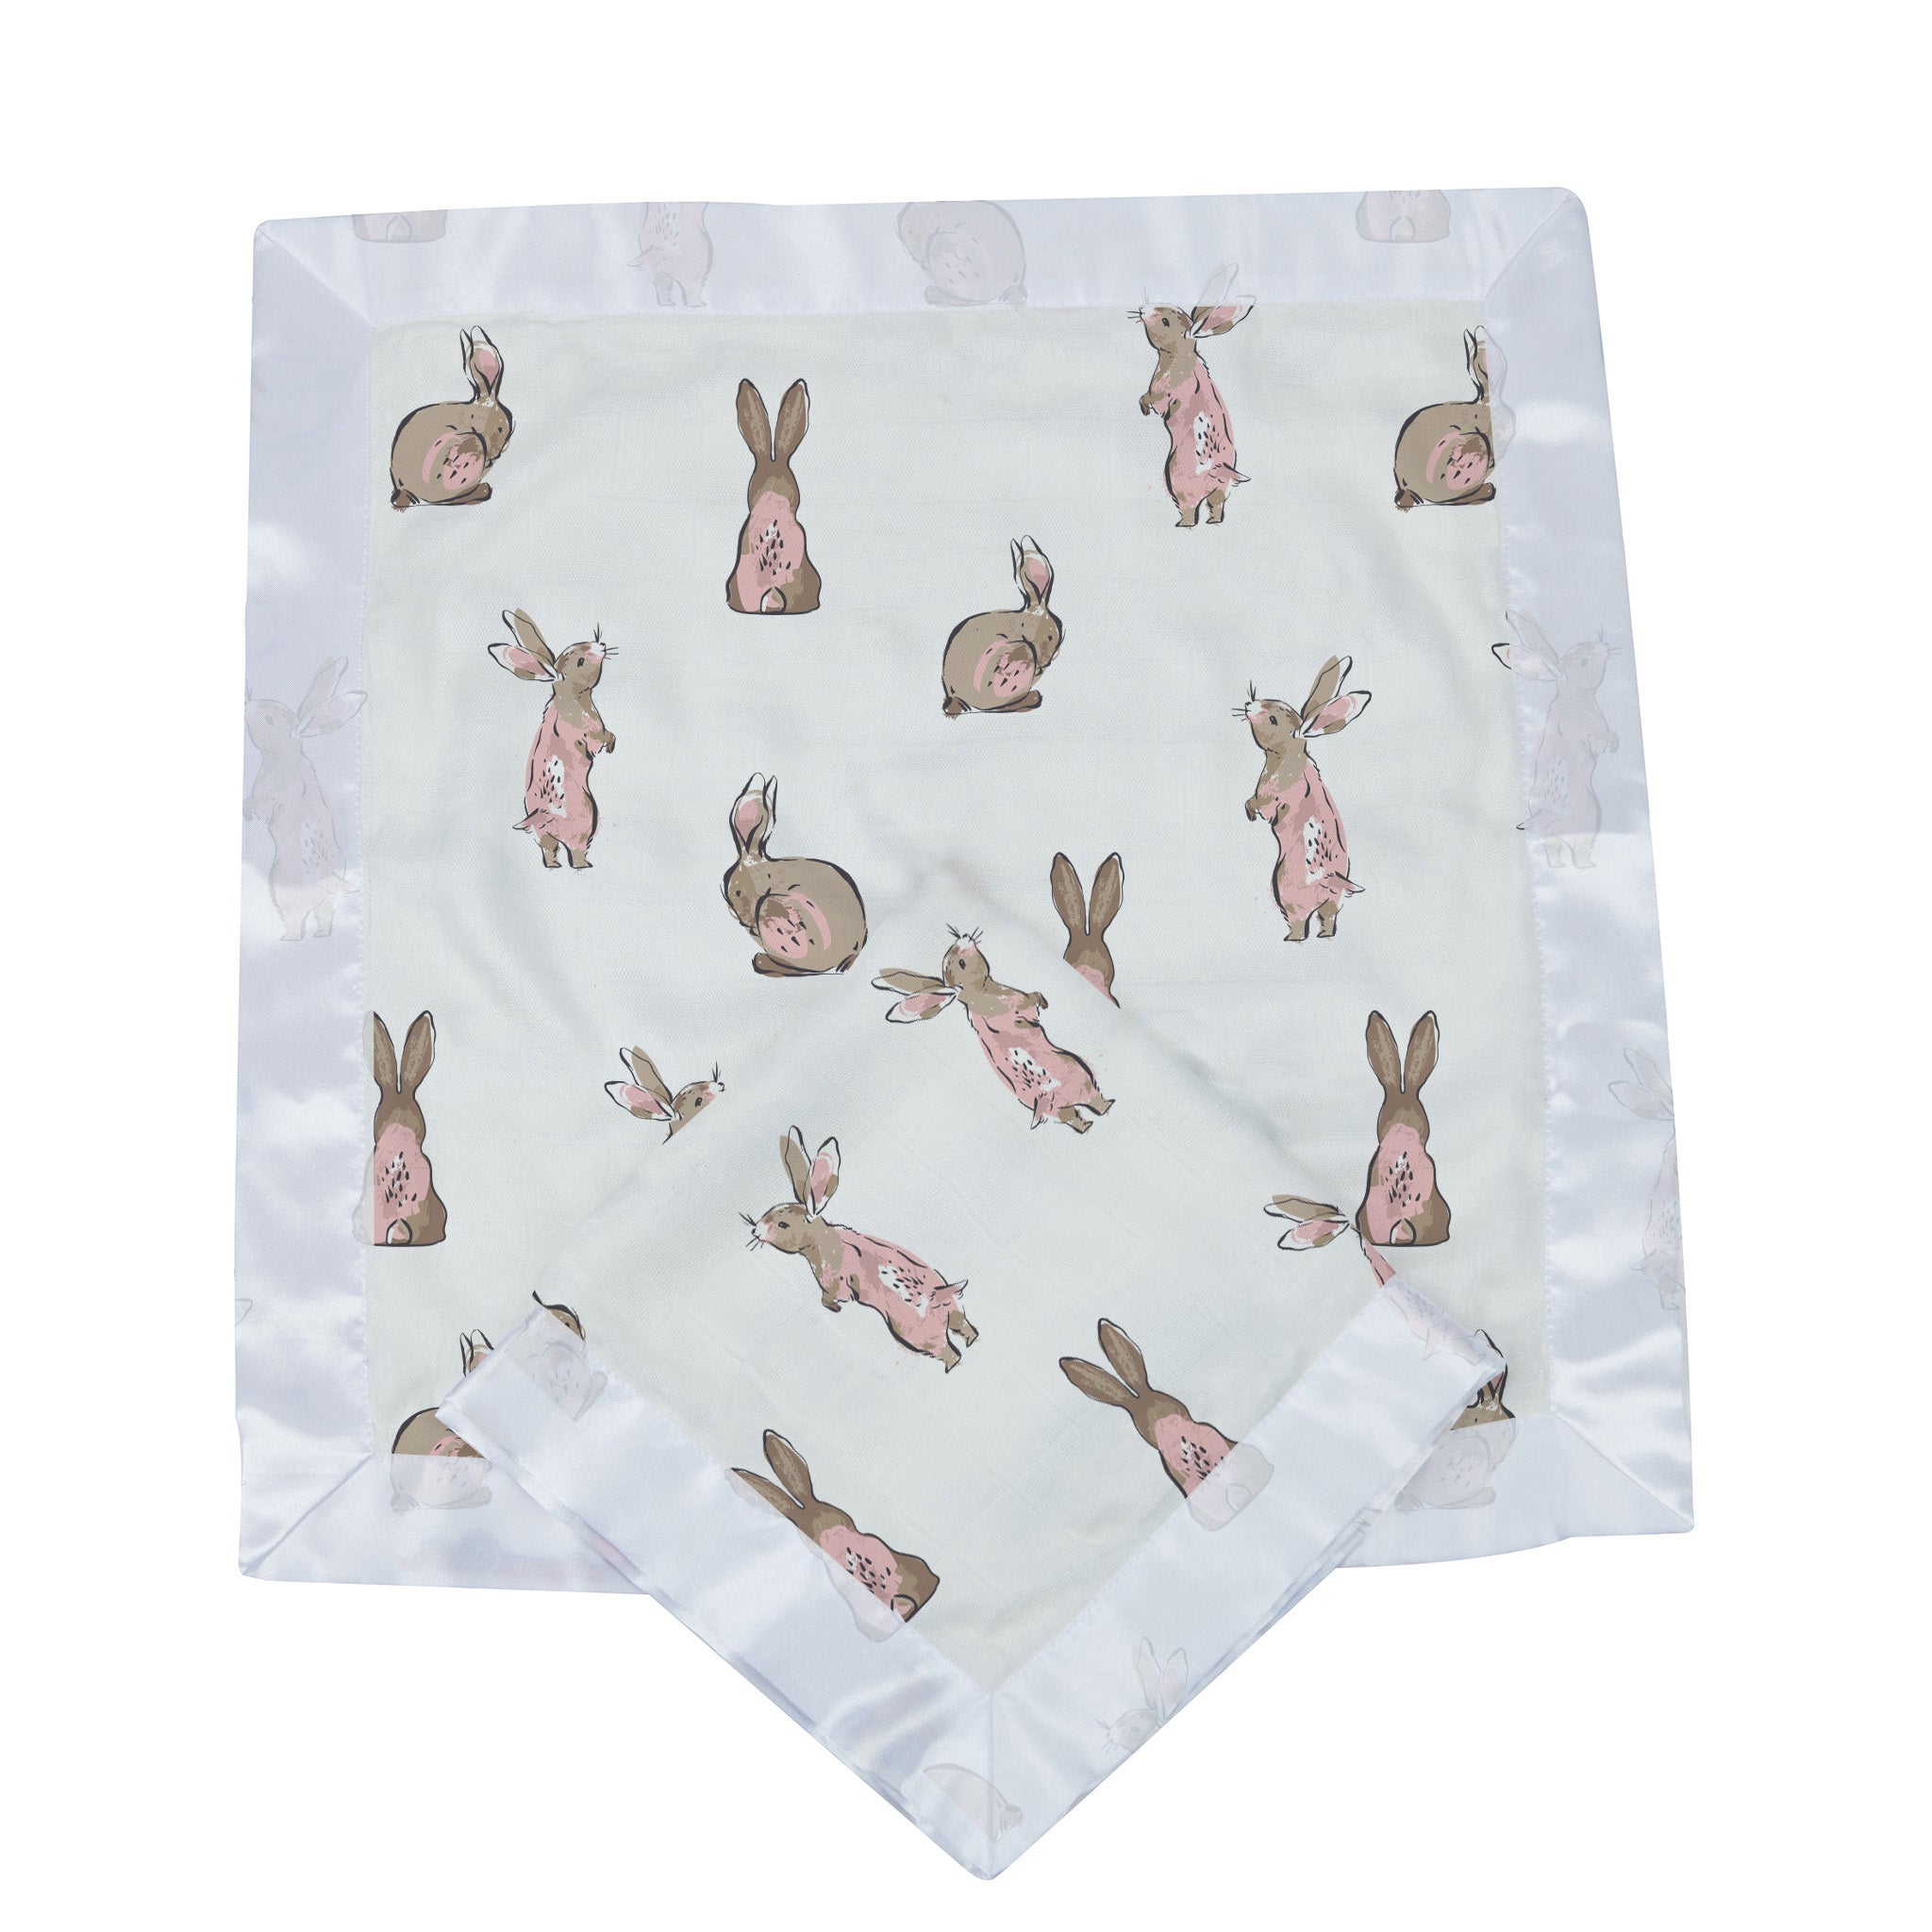 Baby blankets with bunnies